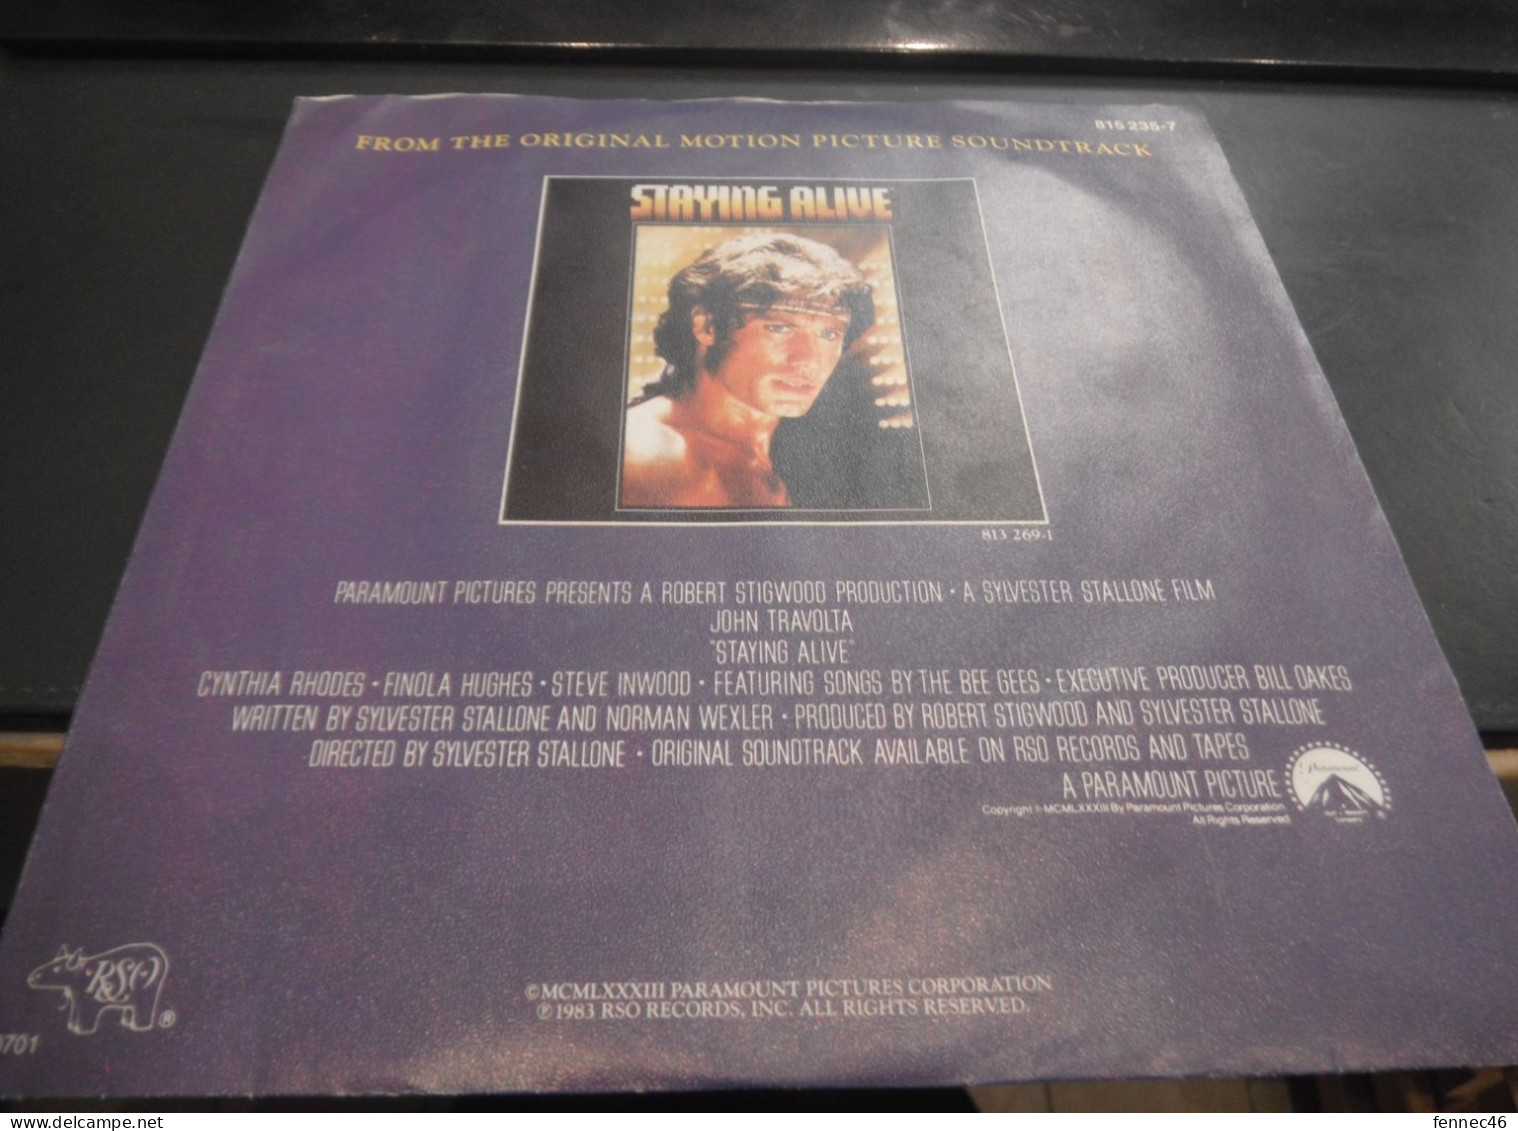 *  (vinyle - 45t) - BEE GEES - Someone Belonging To Someone - I Love You Too Much (From The Original Motion Picture Soun - Musica Di Film